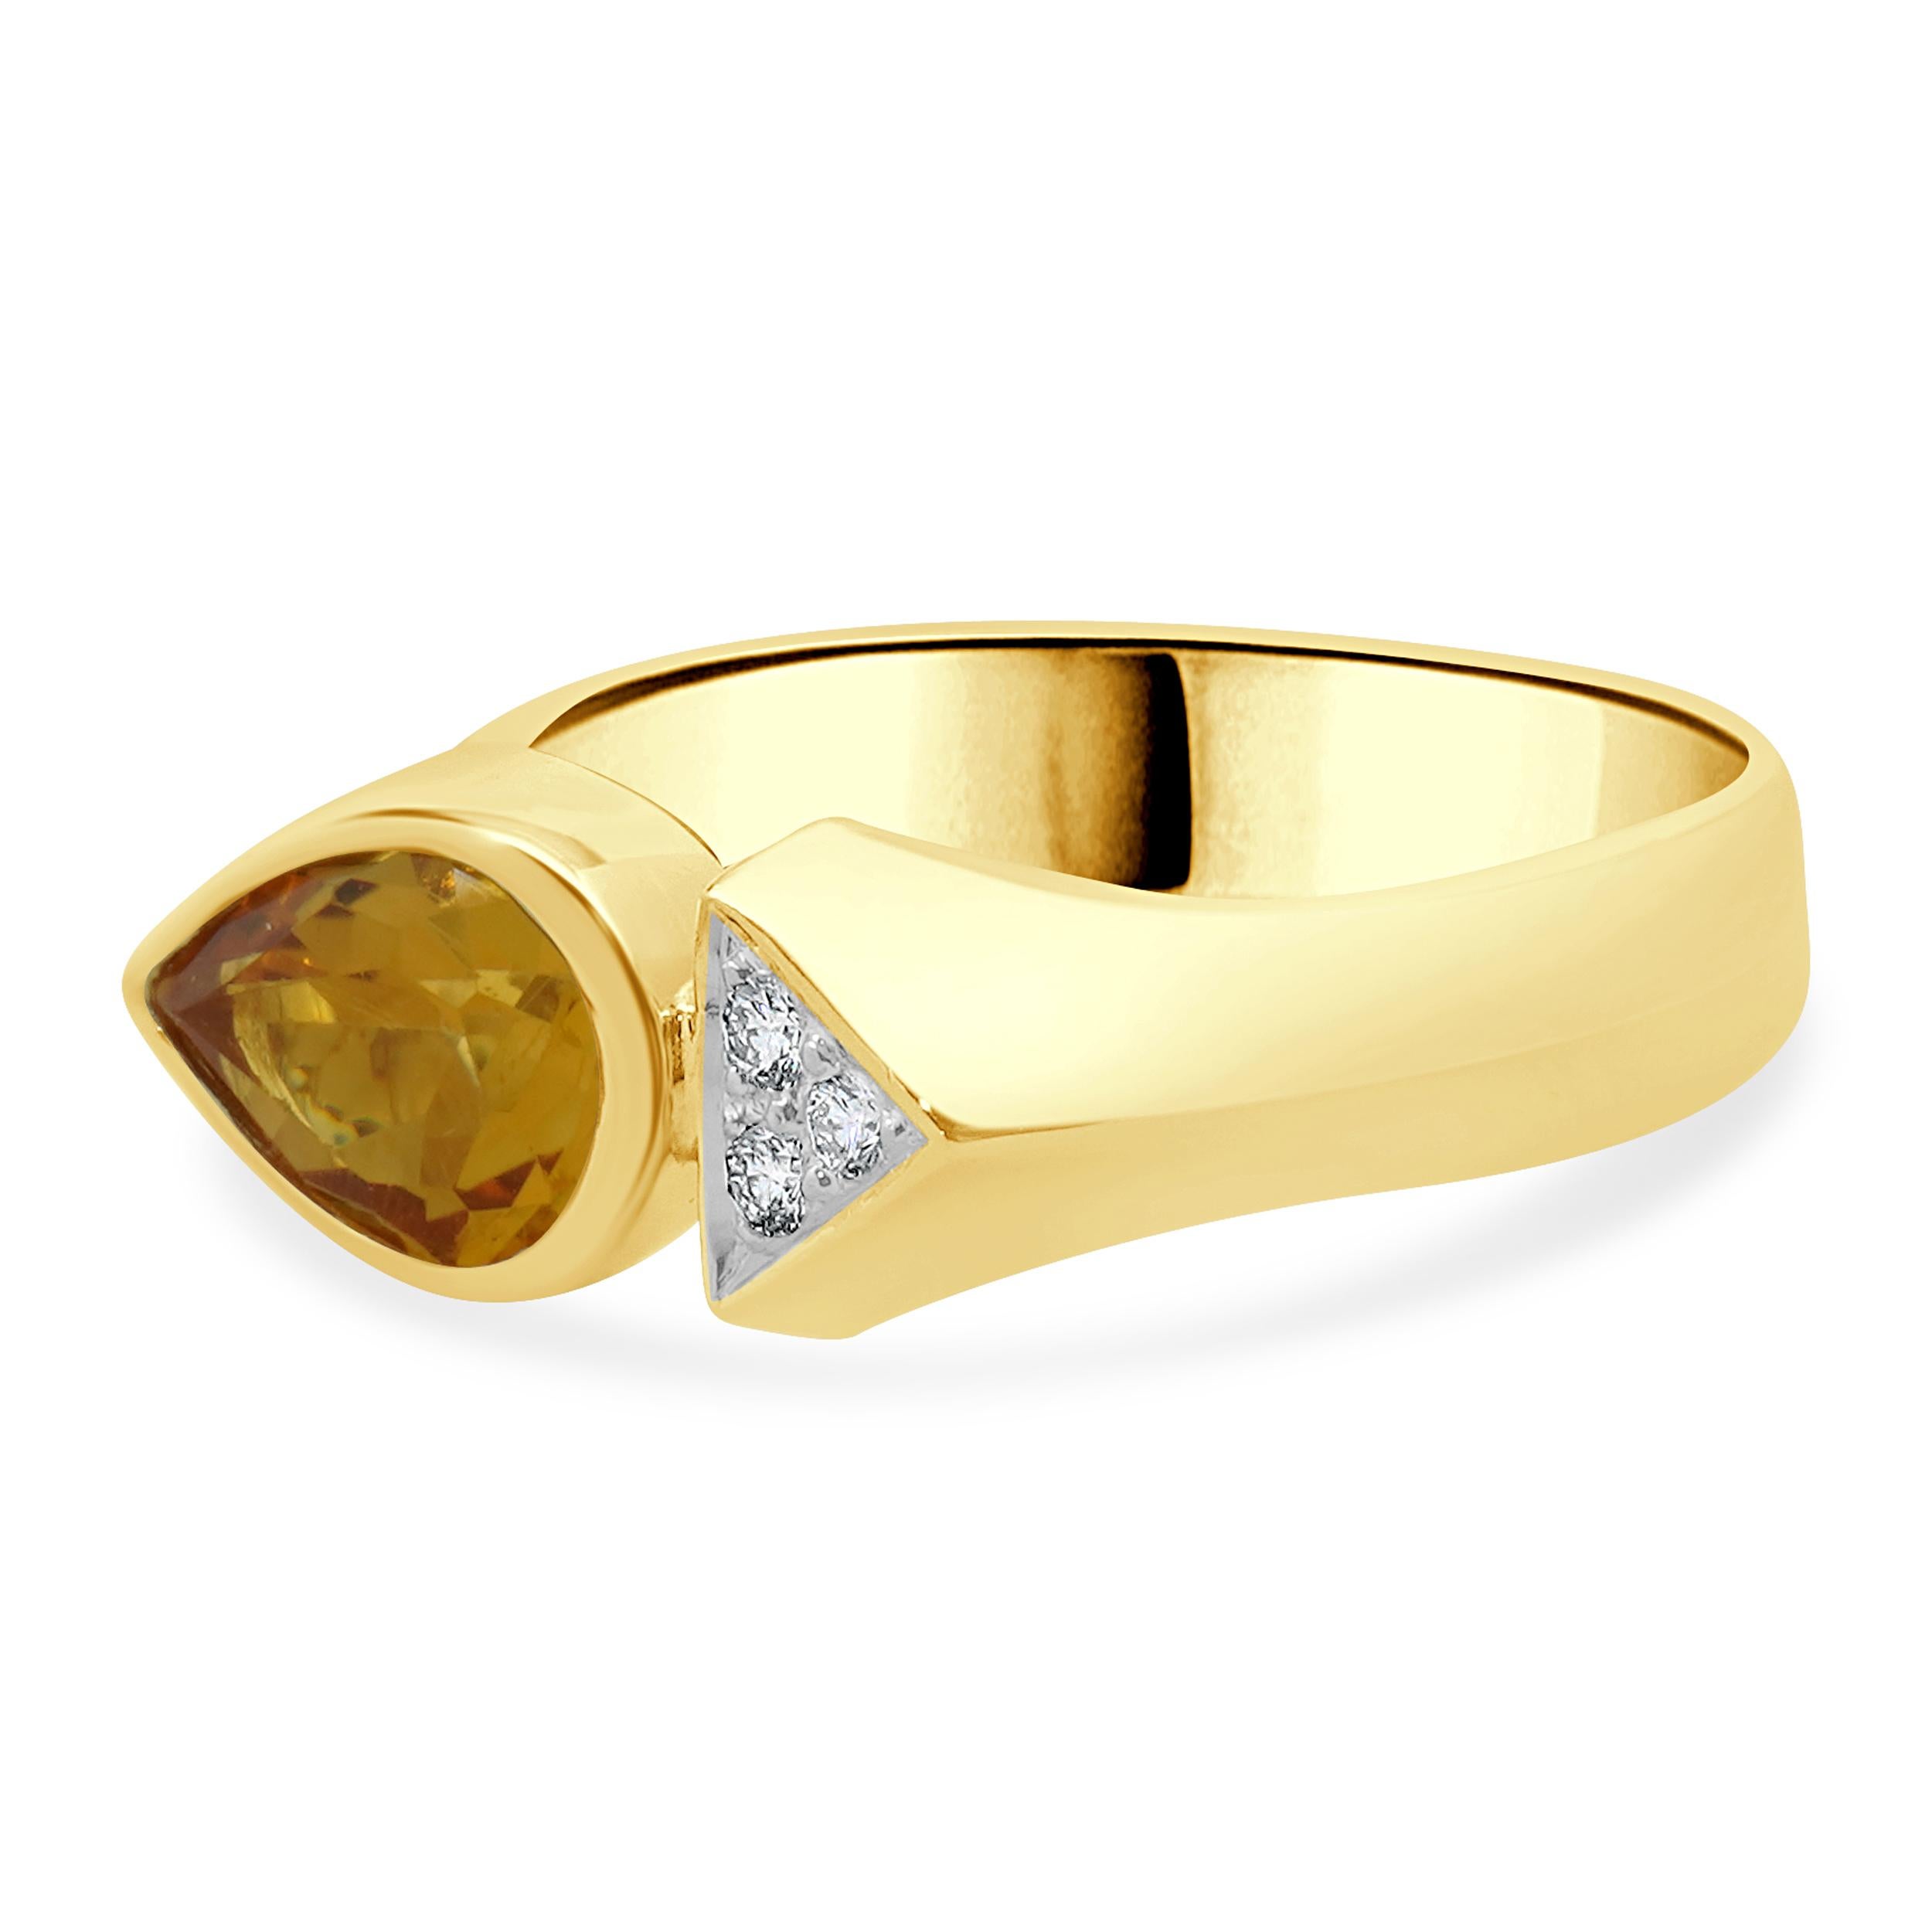 Material: 18K yellow gold
Diamond: 3 round brilliant cut  = 0.06cttw
Color: G
Clarity: SI1
Citrine: 1 pear cut = 1.25ct
Ring Size: 5.25 (please allow up to 2 additional business days for sizing requests)
Dimensions: ring top measures 6.7mm